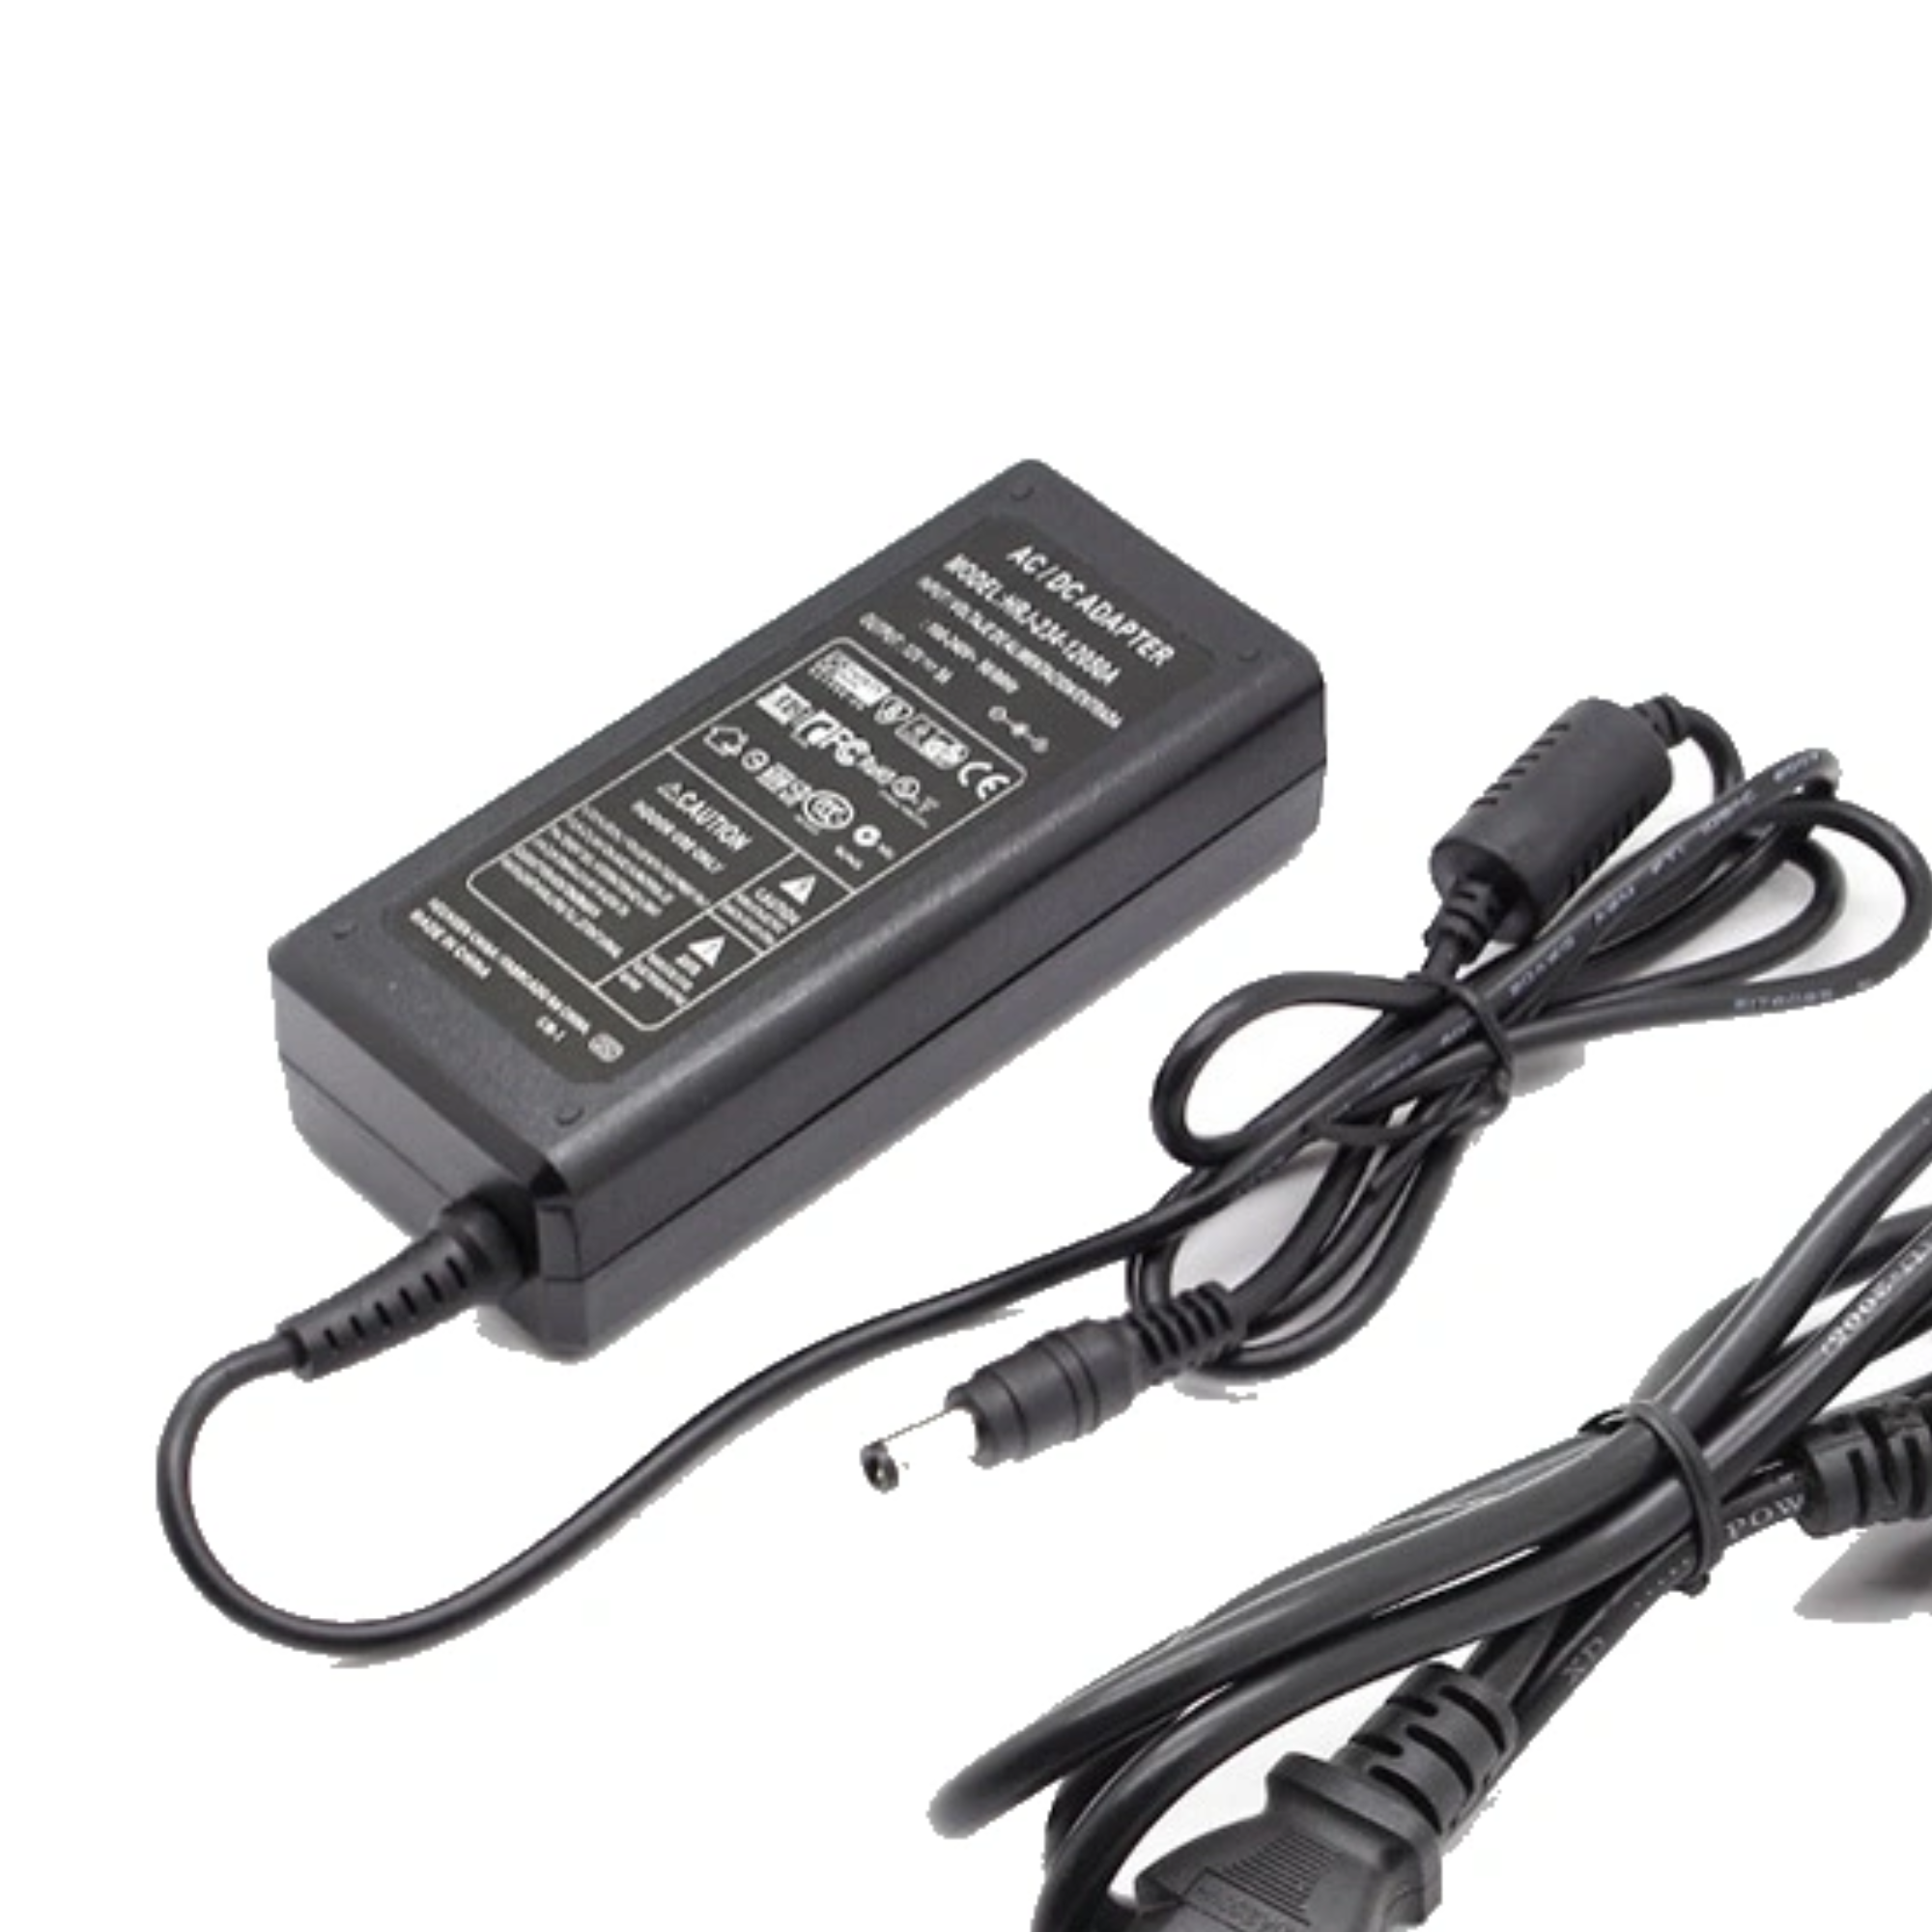 In-line and Plug Pack Power Supplies